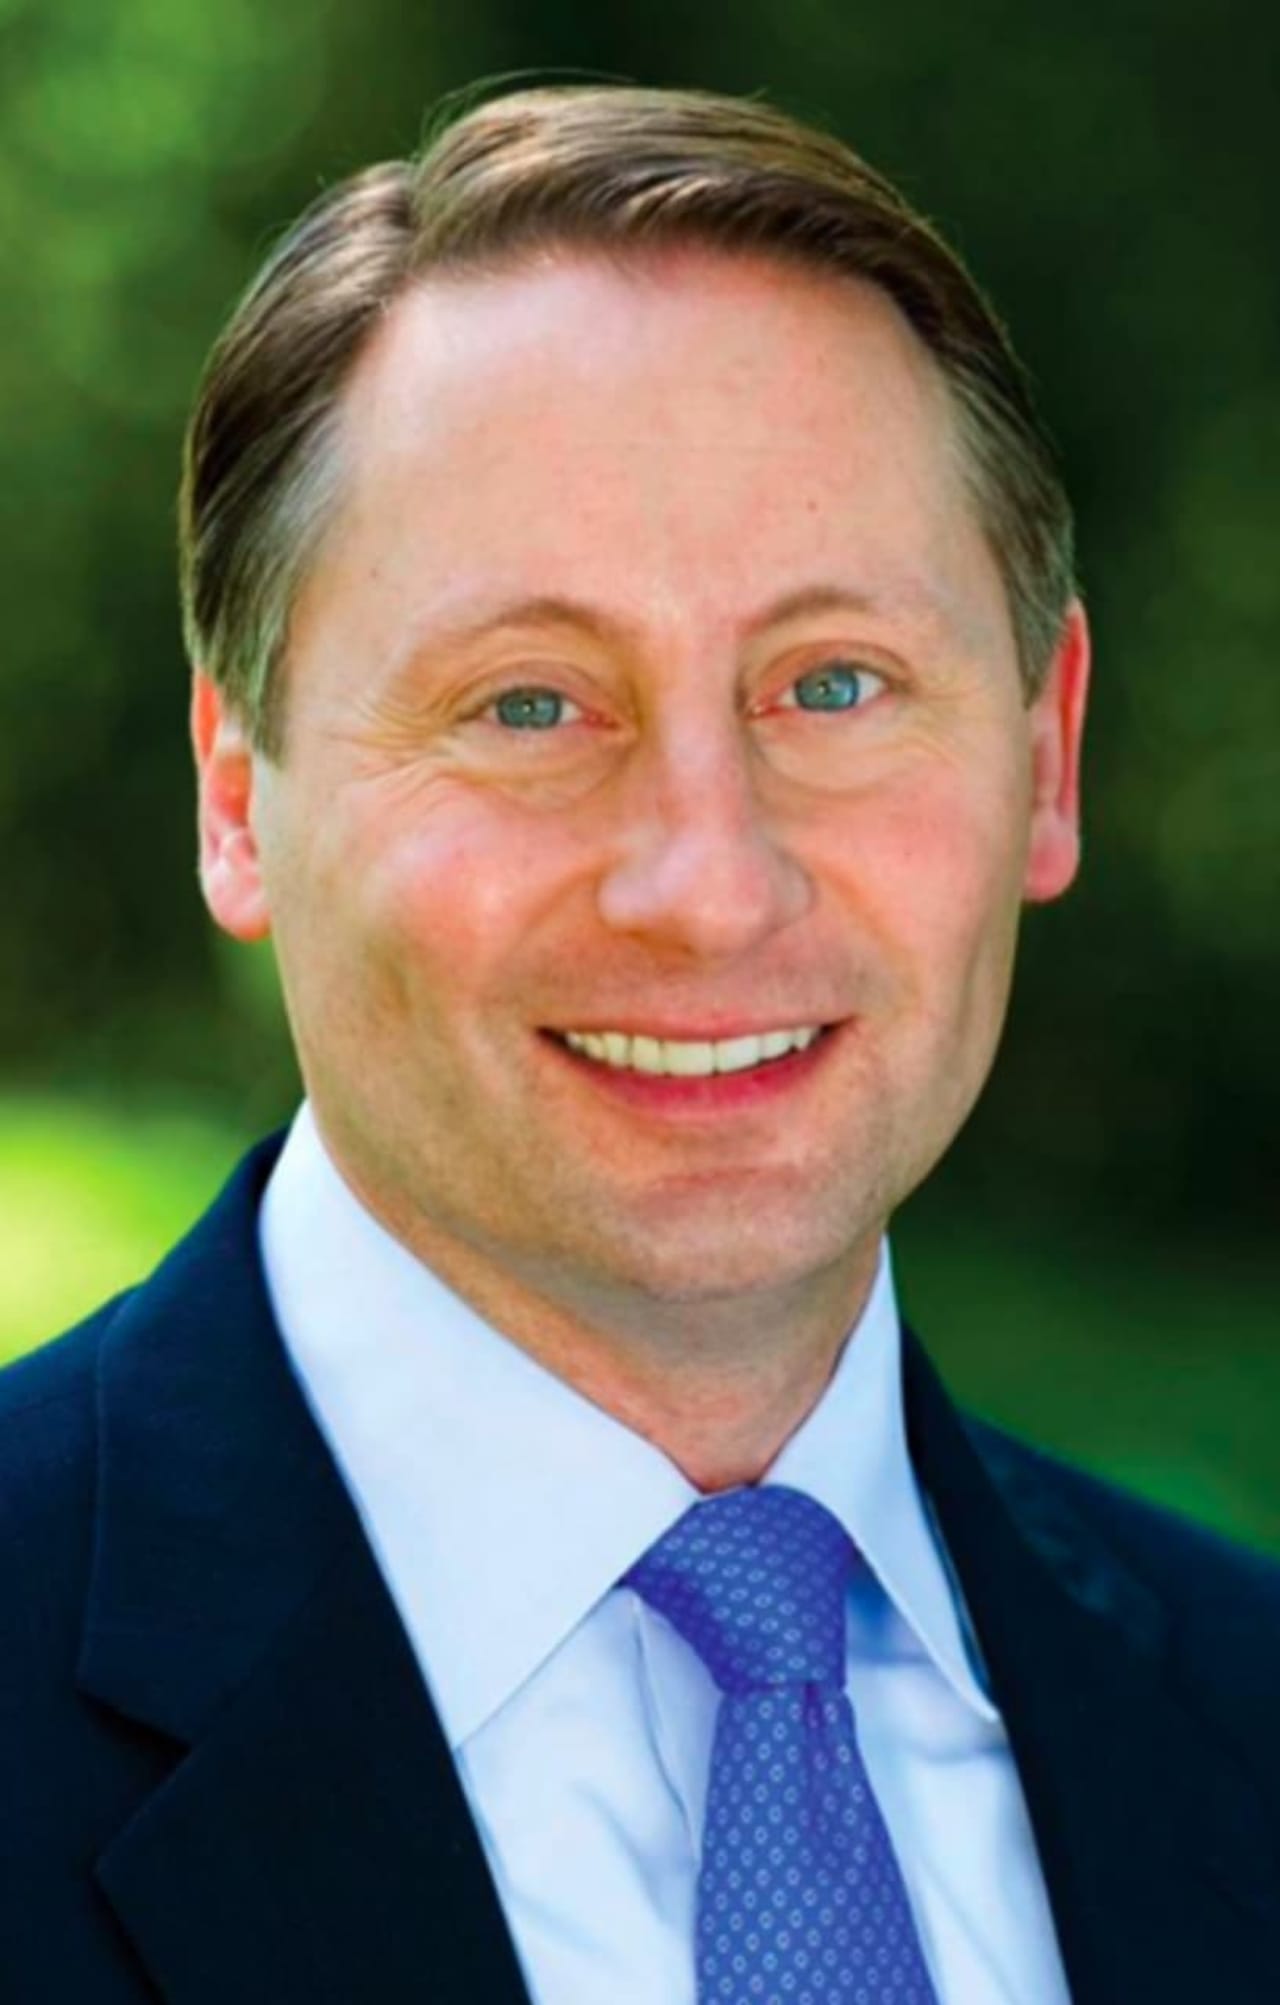 County Executive Rob Astorino touted Westchester as "a smart spot for business" at a recent breakfast meeting co-sponsored by WCBS radio and the Westchester County Office of Economic Development.